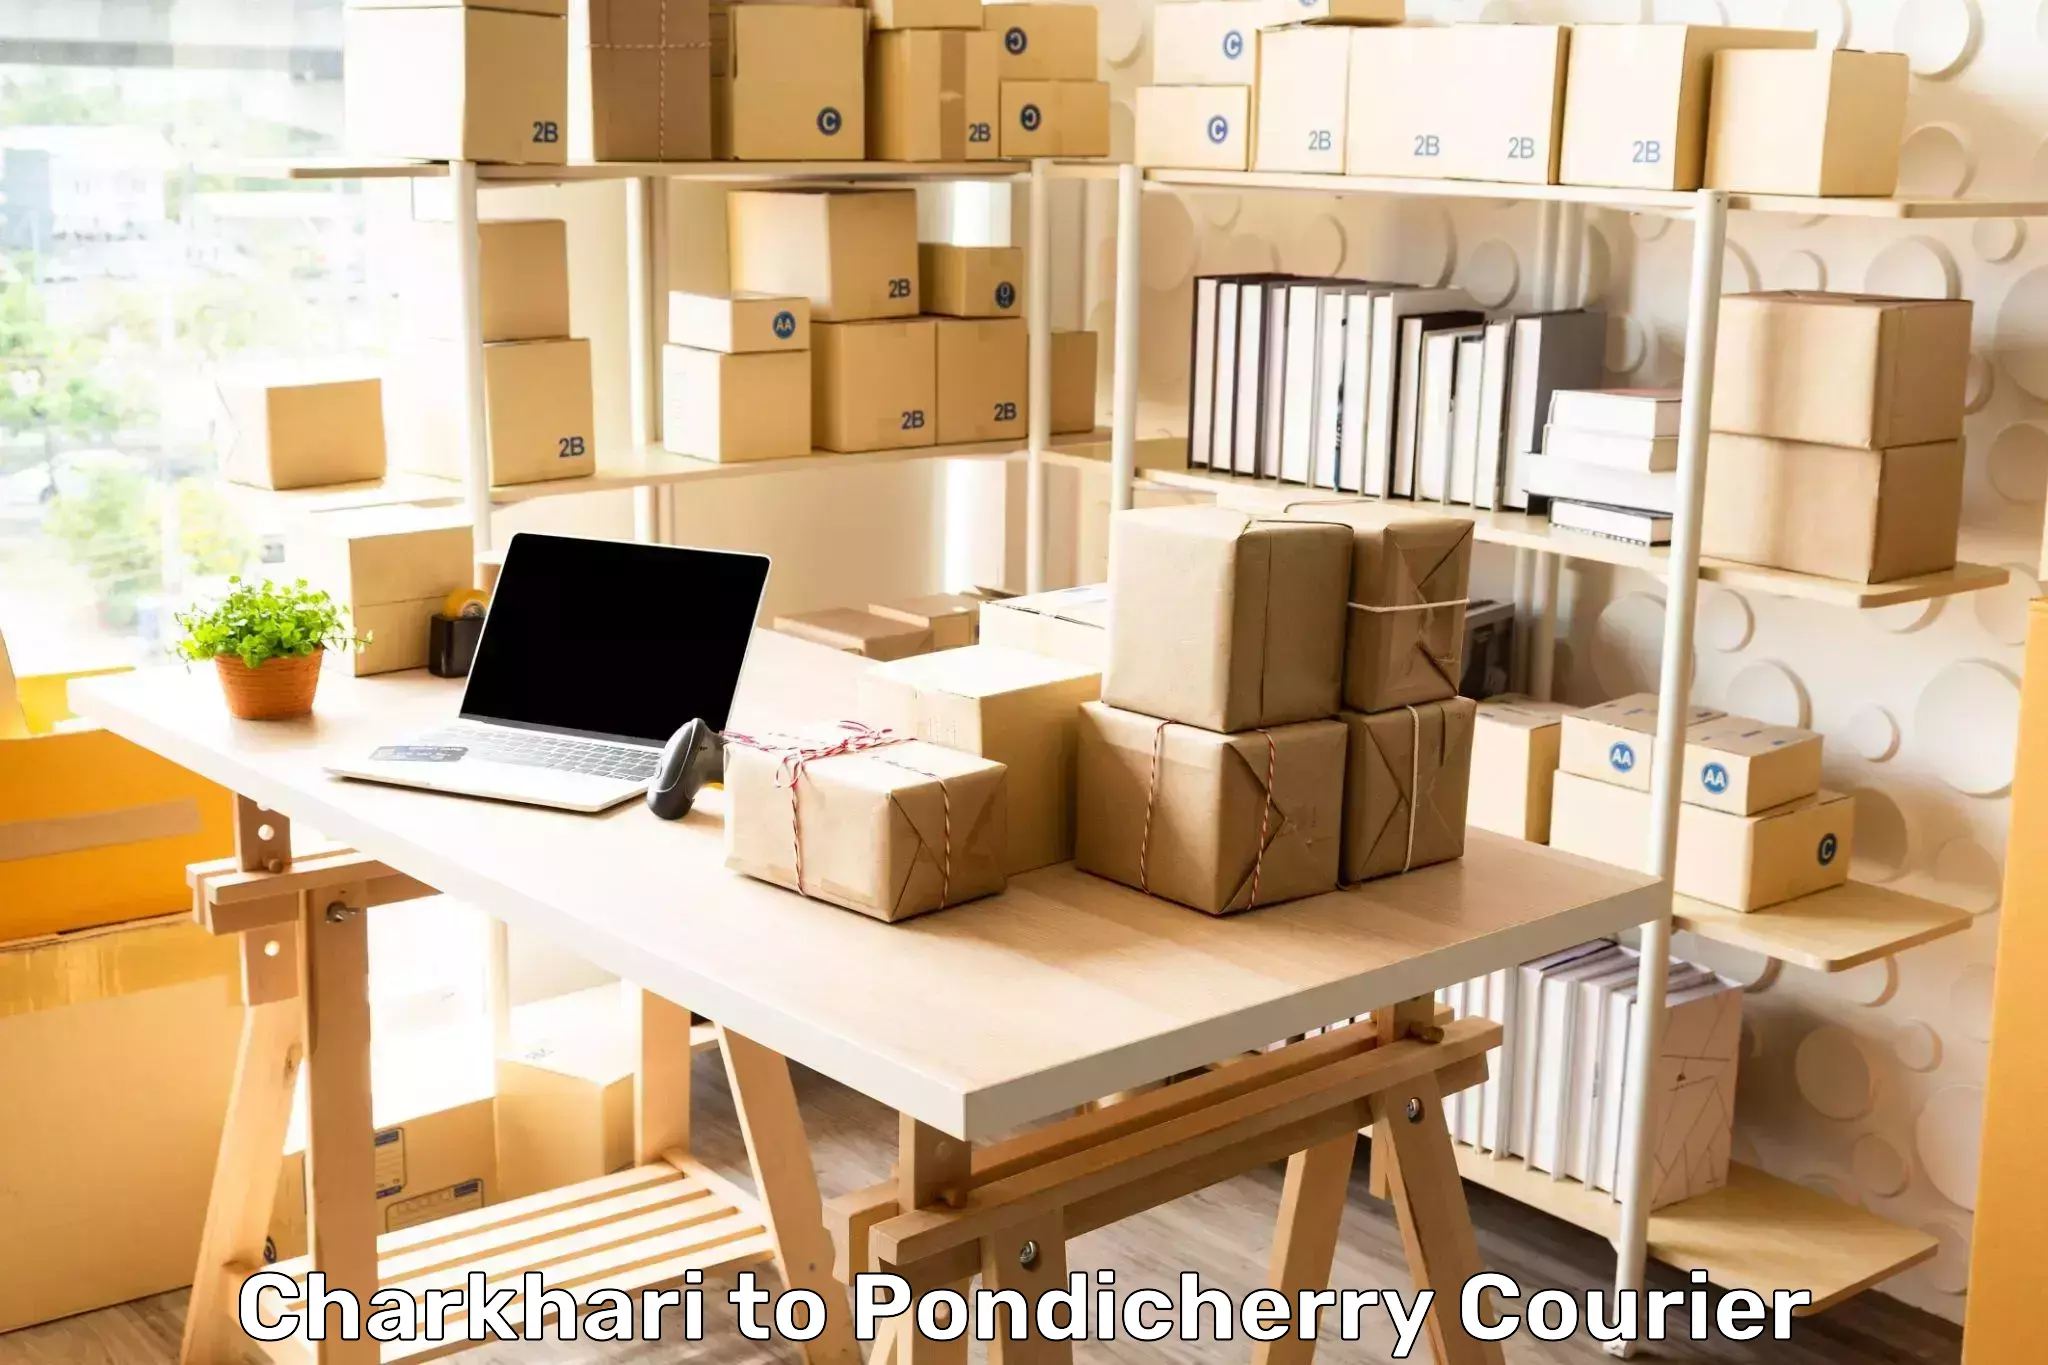 Easy access courier services Charkhari to Pondicherry